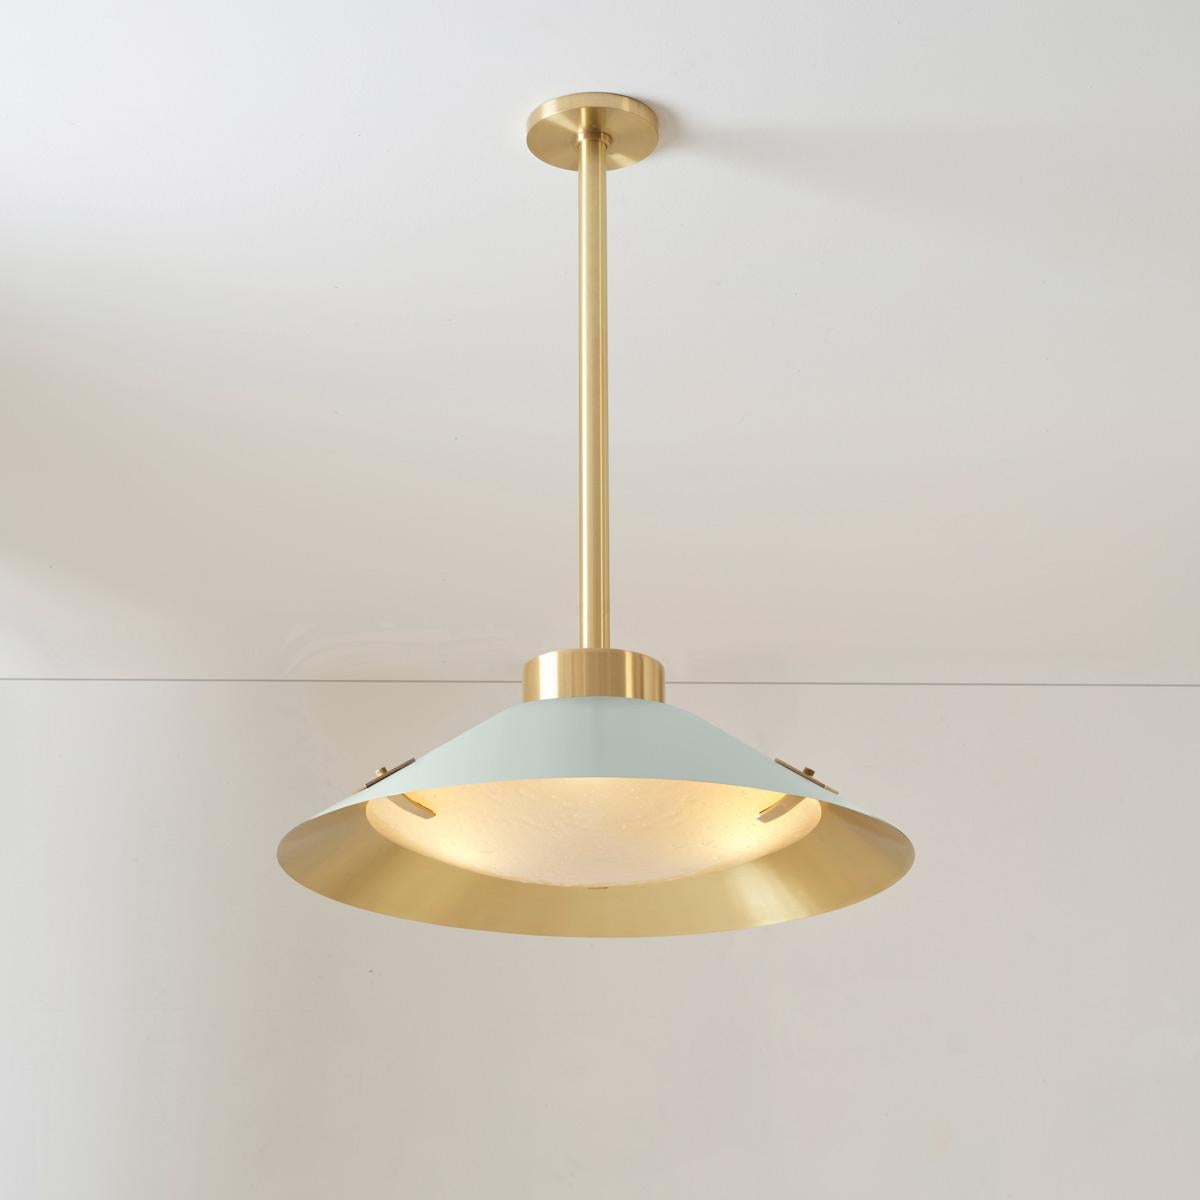 Kono Pendant by Gaspare Asaro. Satin Brass and Stone Grey In New Condition For Sale In New York, NY